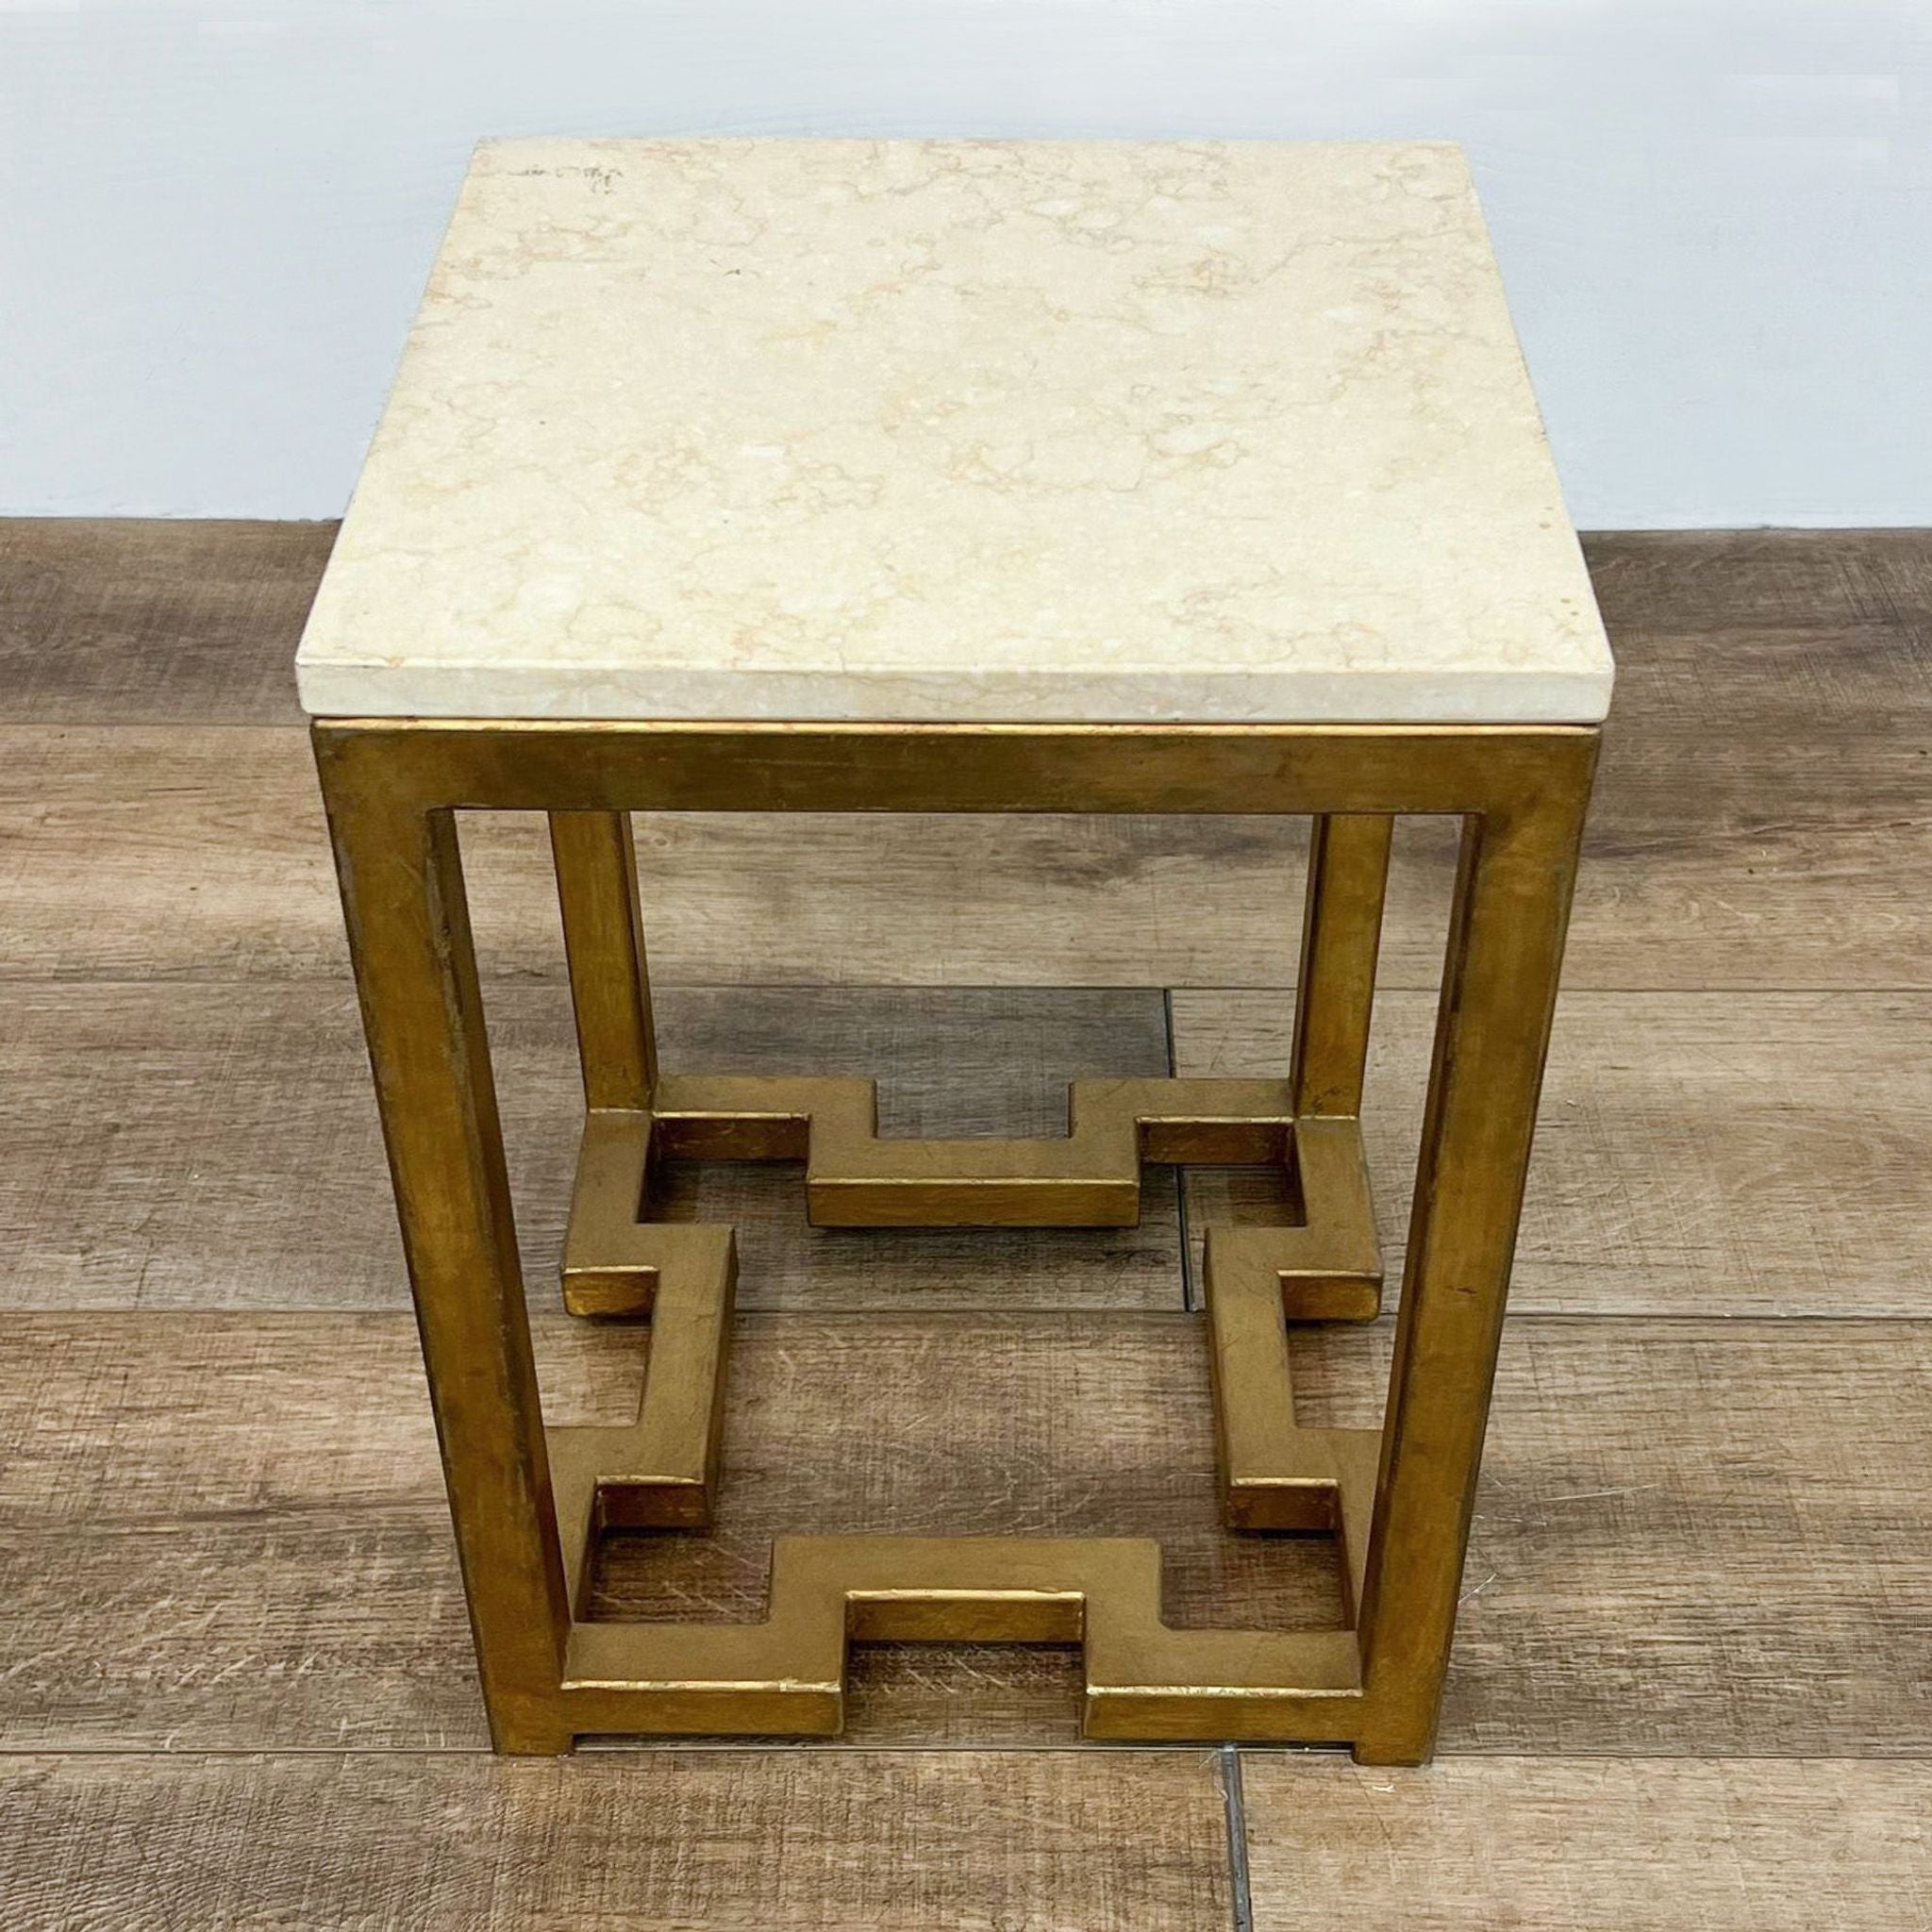 Reperch brand side table with antiqued brass finish metal base and cream-colored top, on a wooden floor.